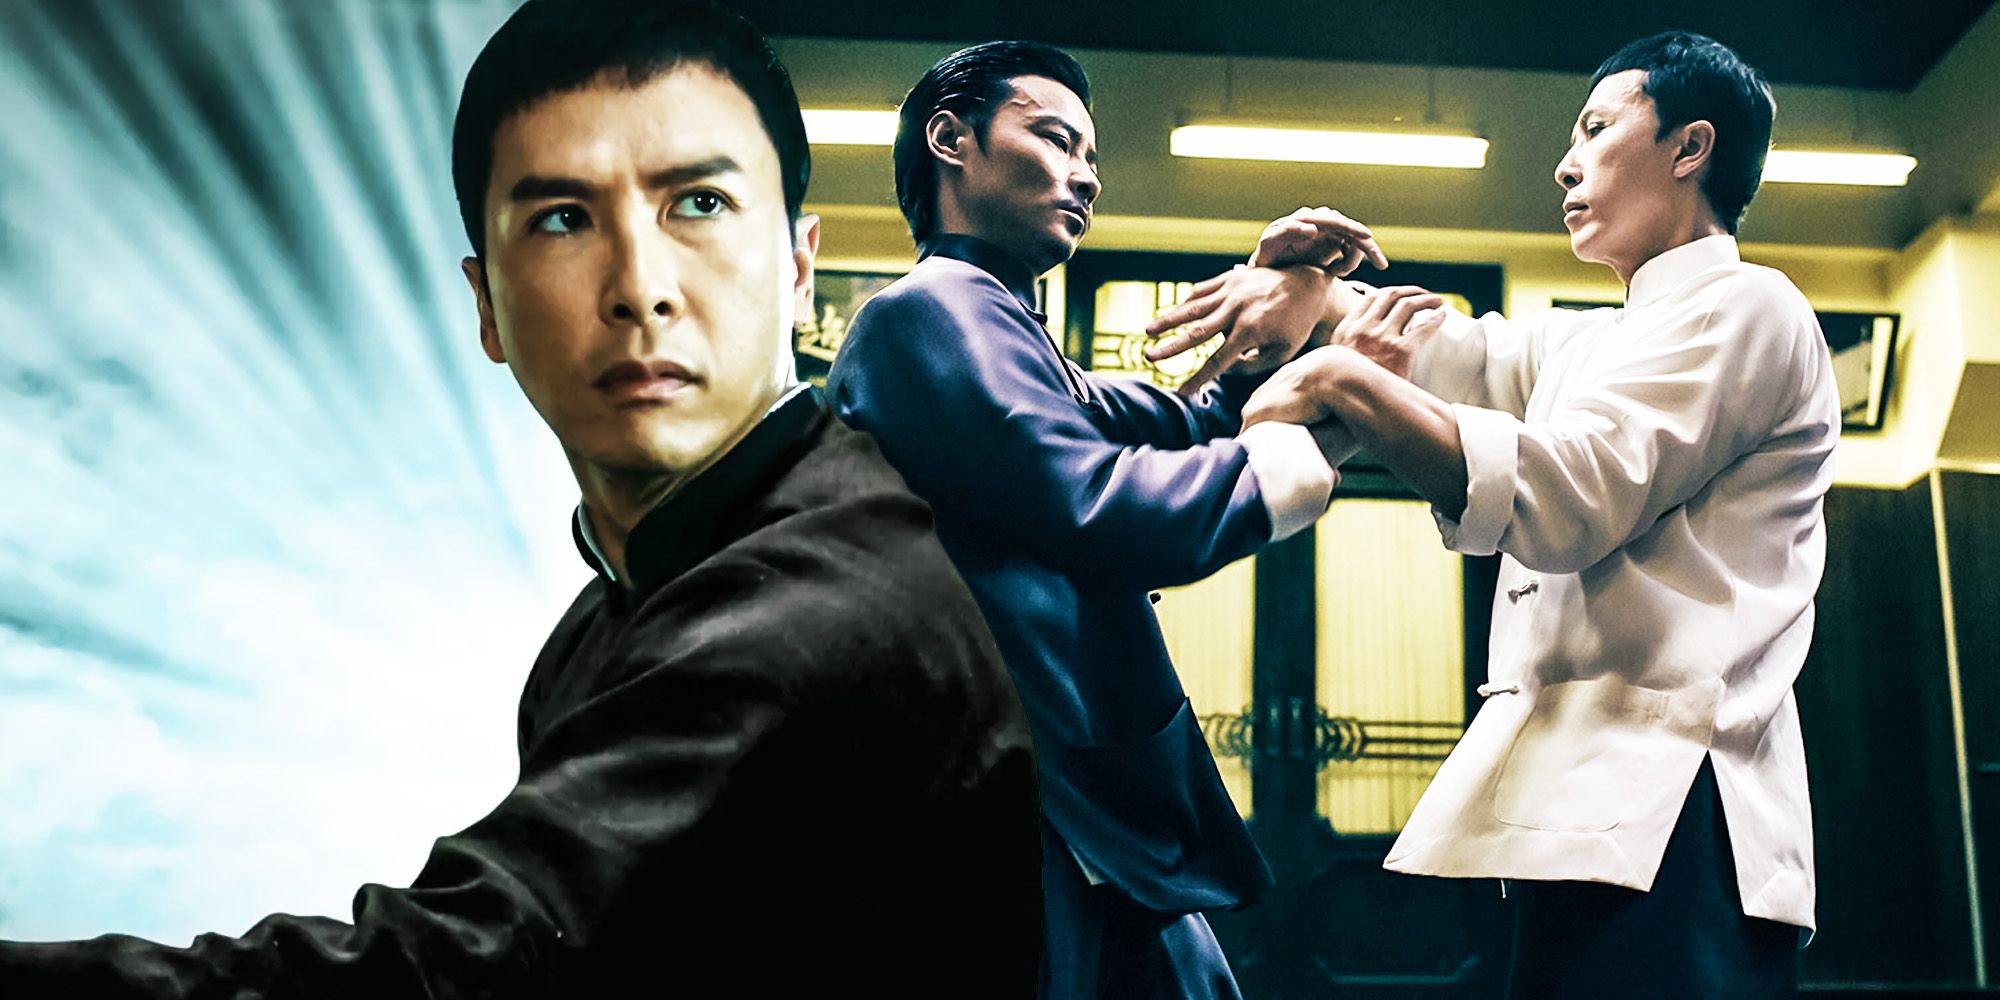 ip man the secret meanings behind donnie yen's martial arts scenes